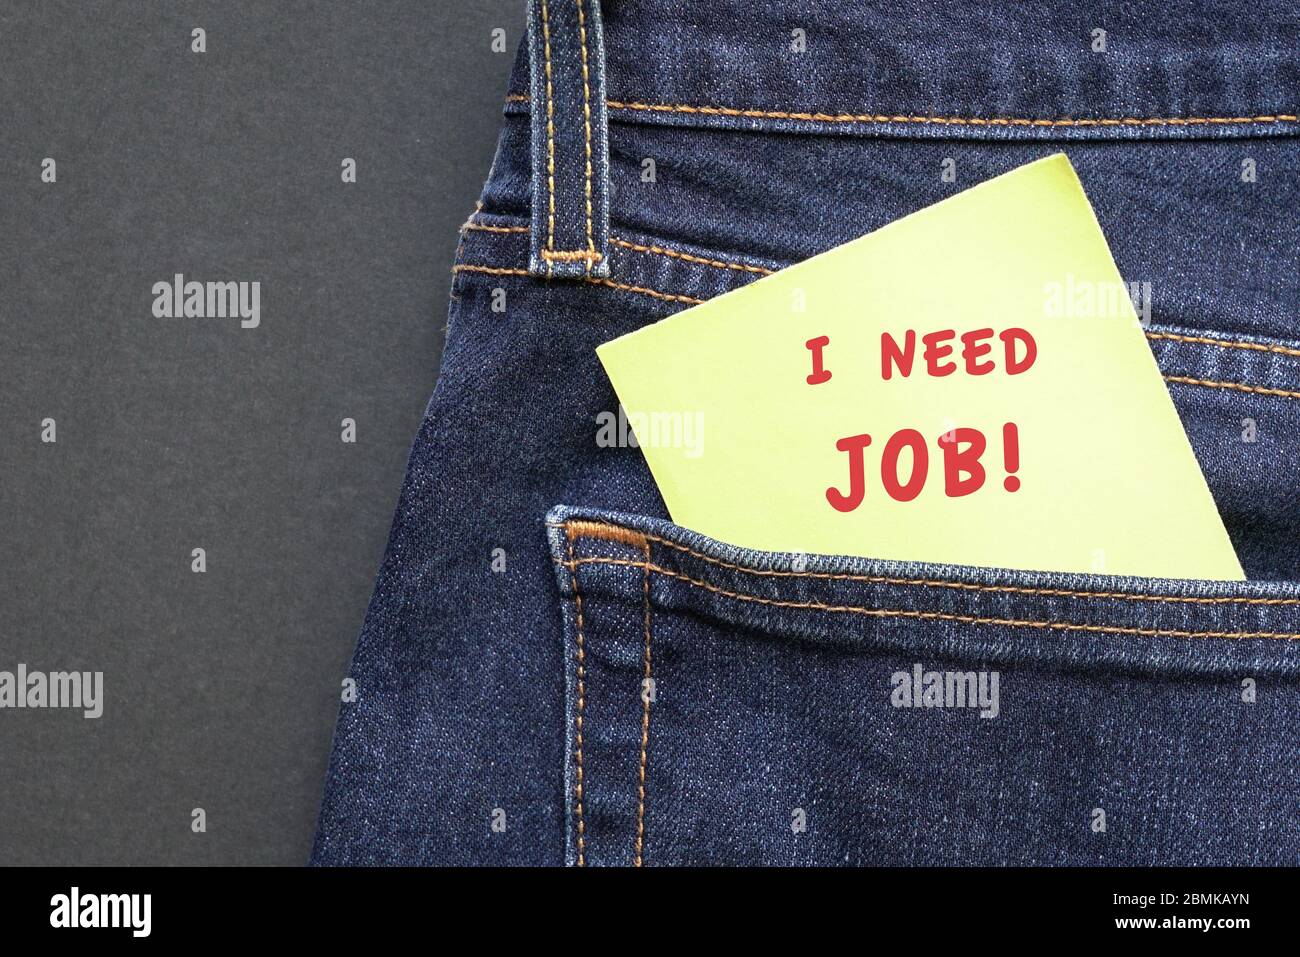 Job Occupation Livelihood Employment High Resolution Stock Photography and  Images - Alamy